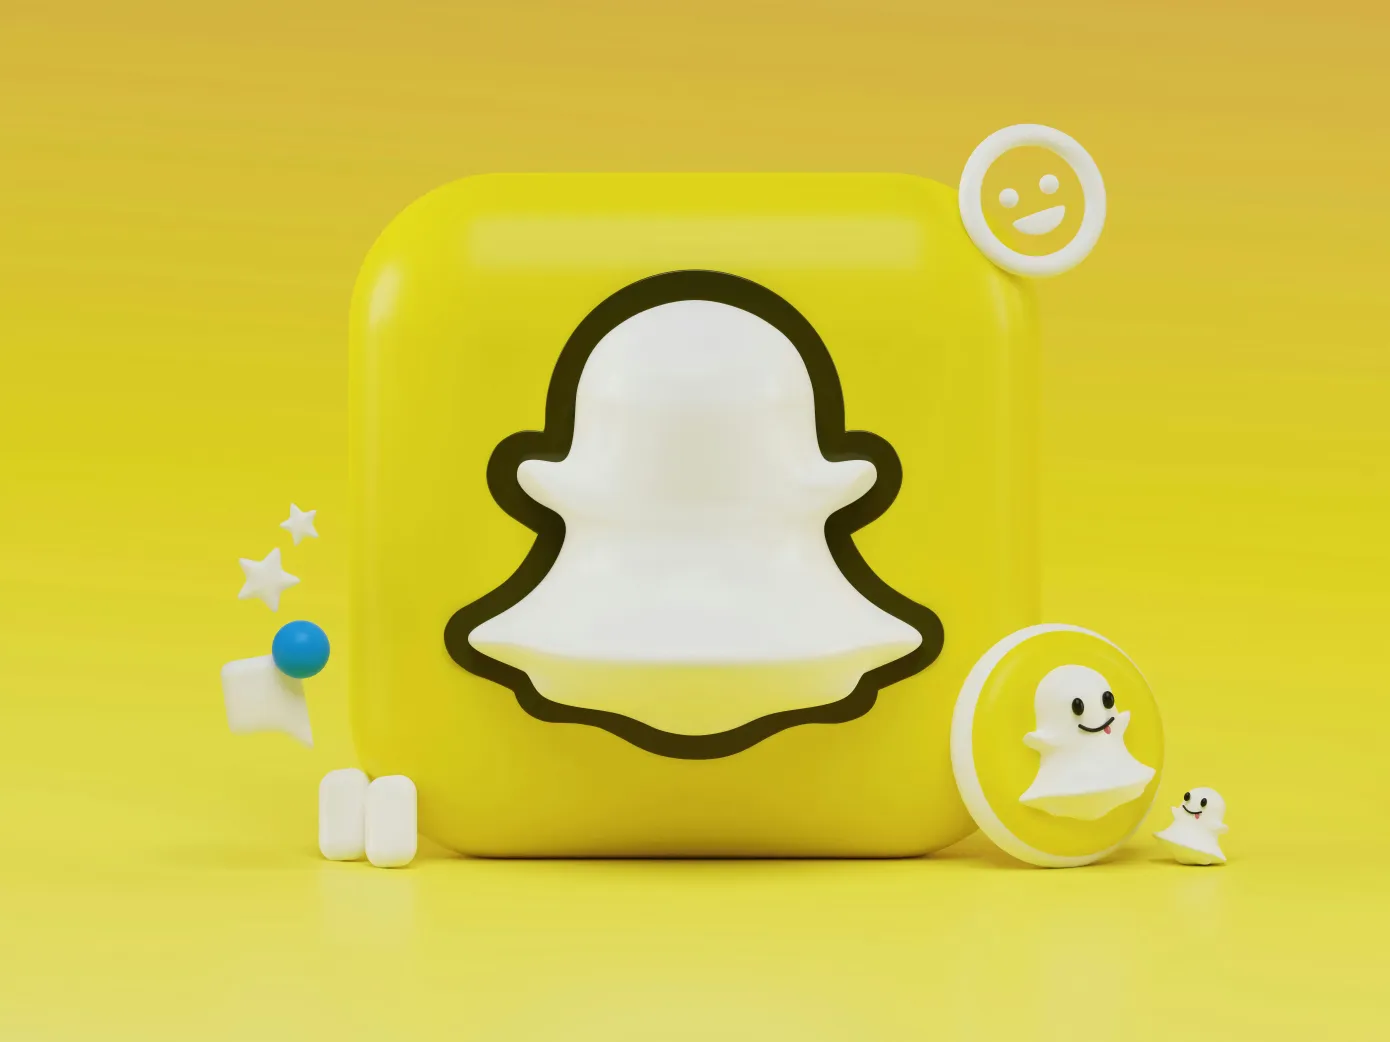 Snapchat will soon introduce watermarks on images created with its advanced AI tools.